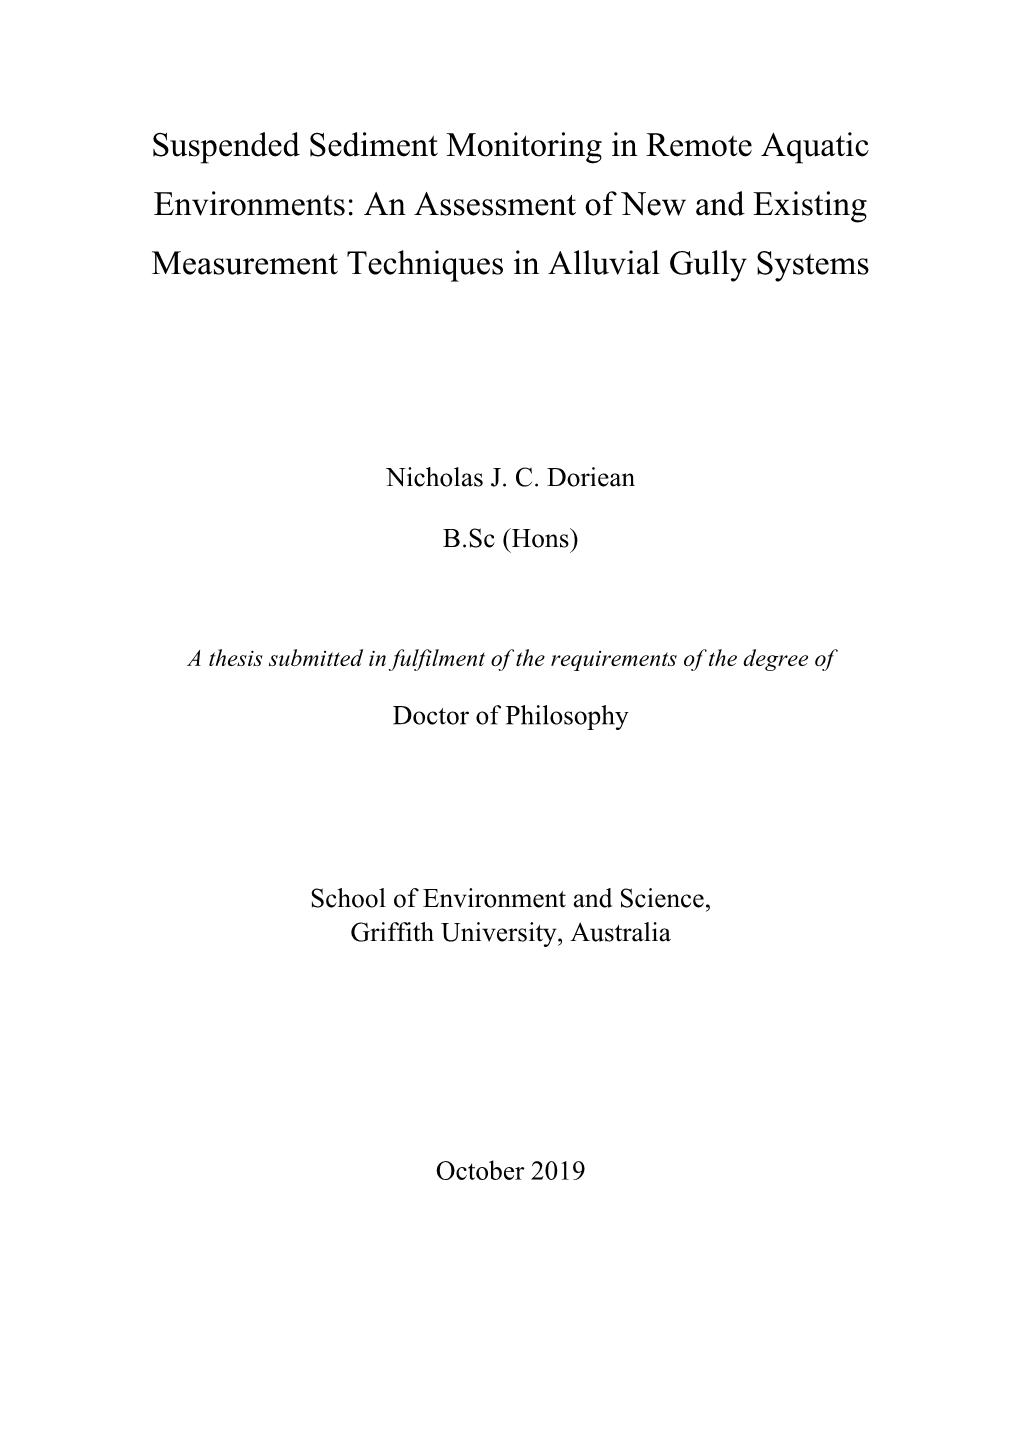 Suspended Sediment Monitoring in Remote Aquatic Environments: an Assessment of New and Existing Measurement Techniques in Alluvial Gully Systems